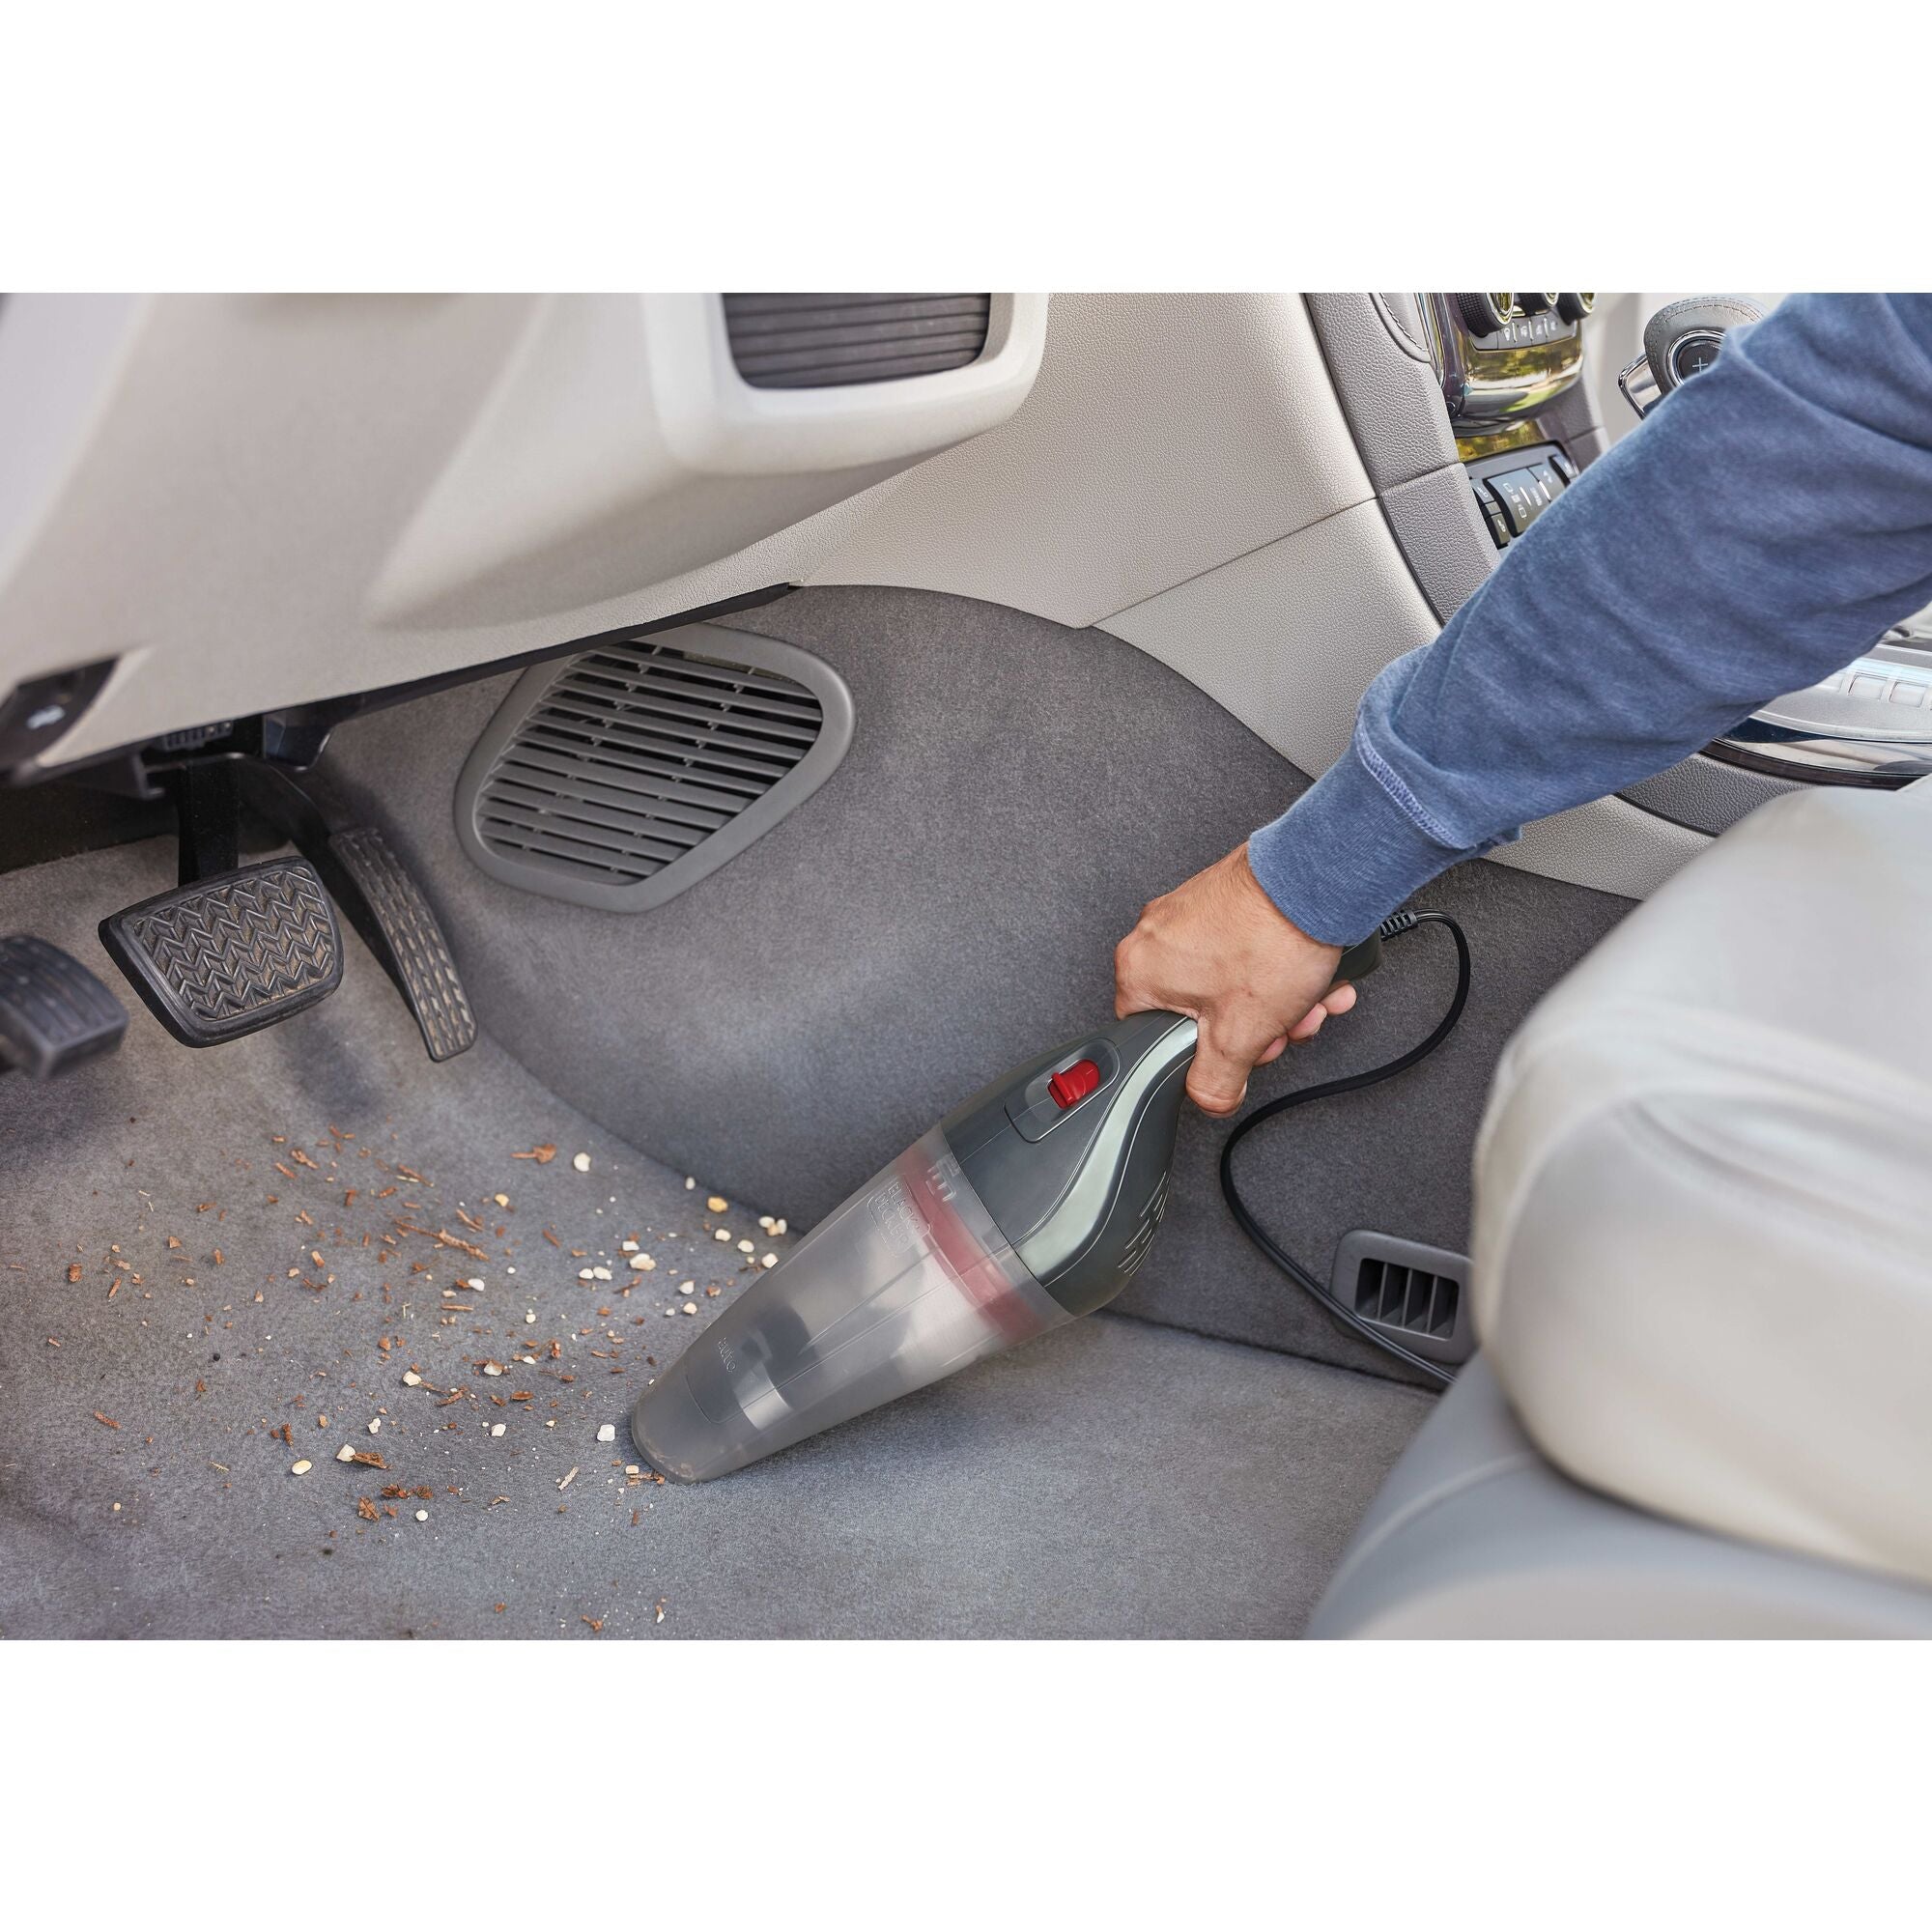 Black and decker handheld vacuum for car being used.